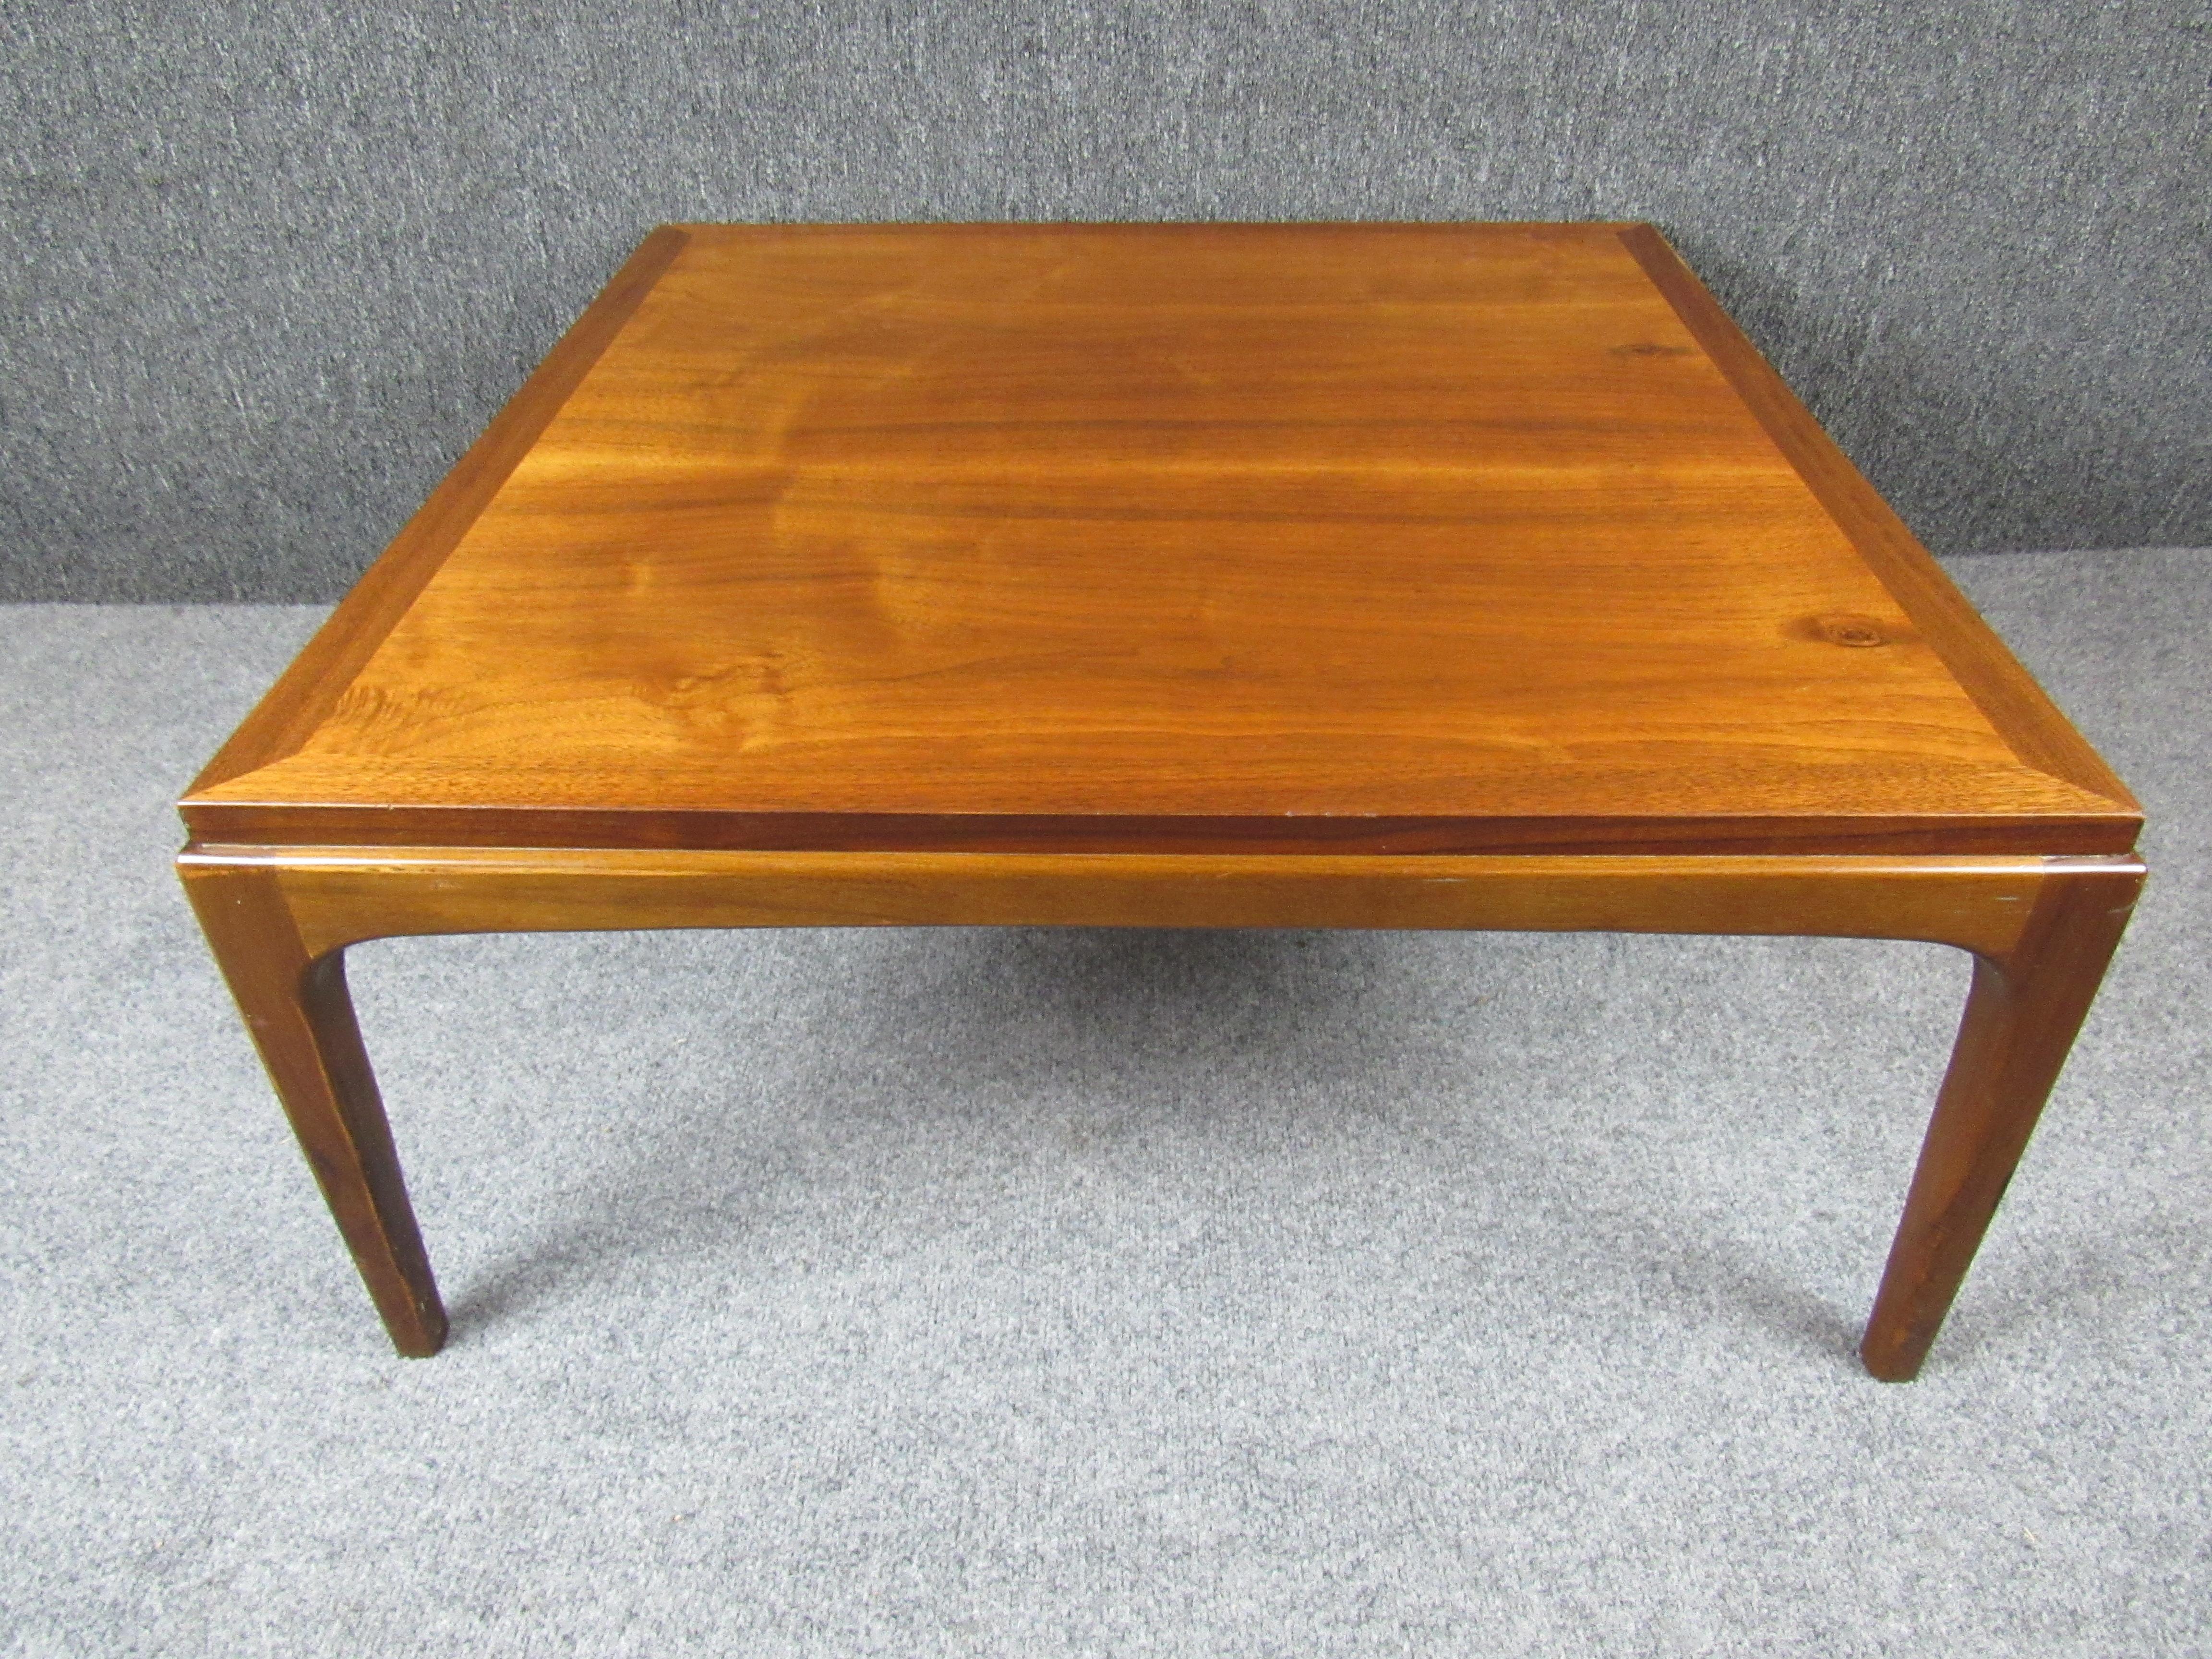 Attractive, yet practical, this table features all the hallmarks that have made Lane Furniture an American mid-century icon. Made with real wood by real craftsmen in Altavista, Virginia, USA this table features a beautifully figured walnut grain